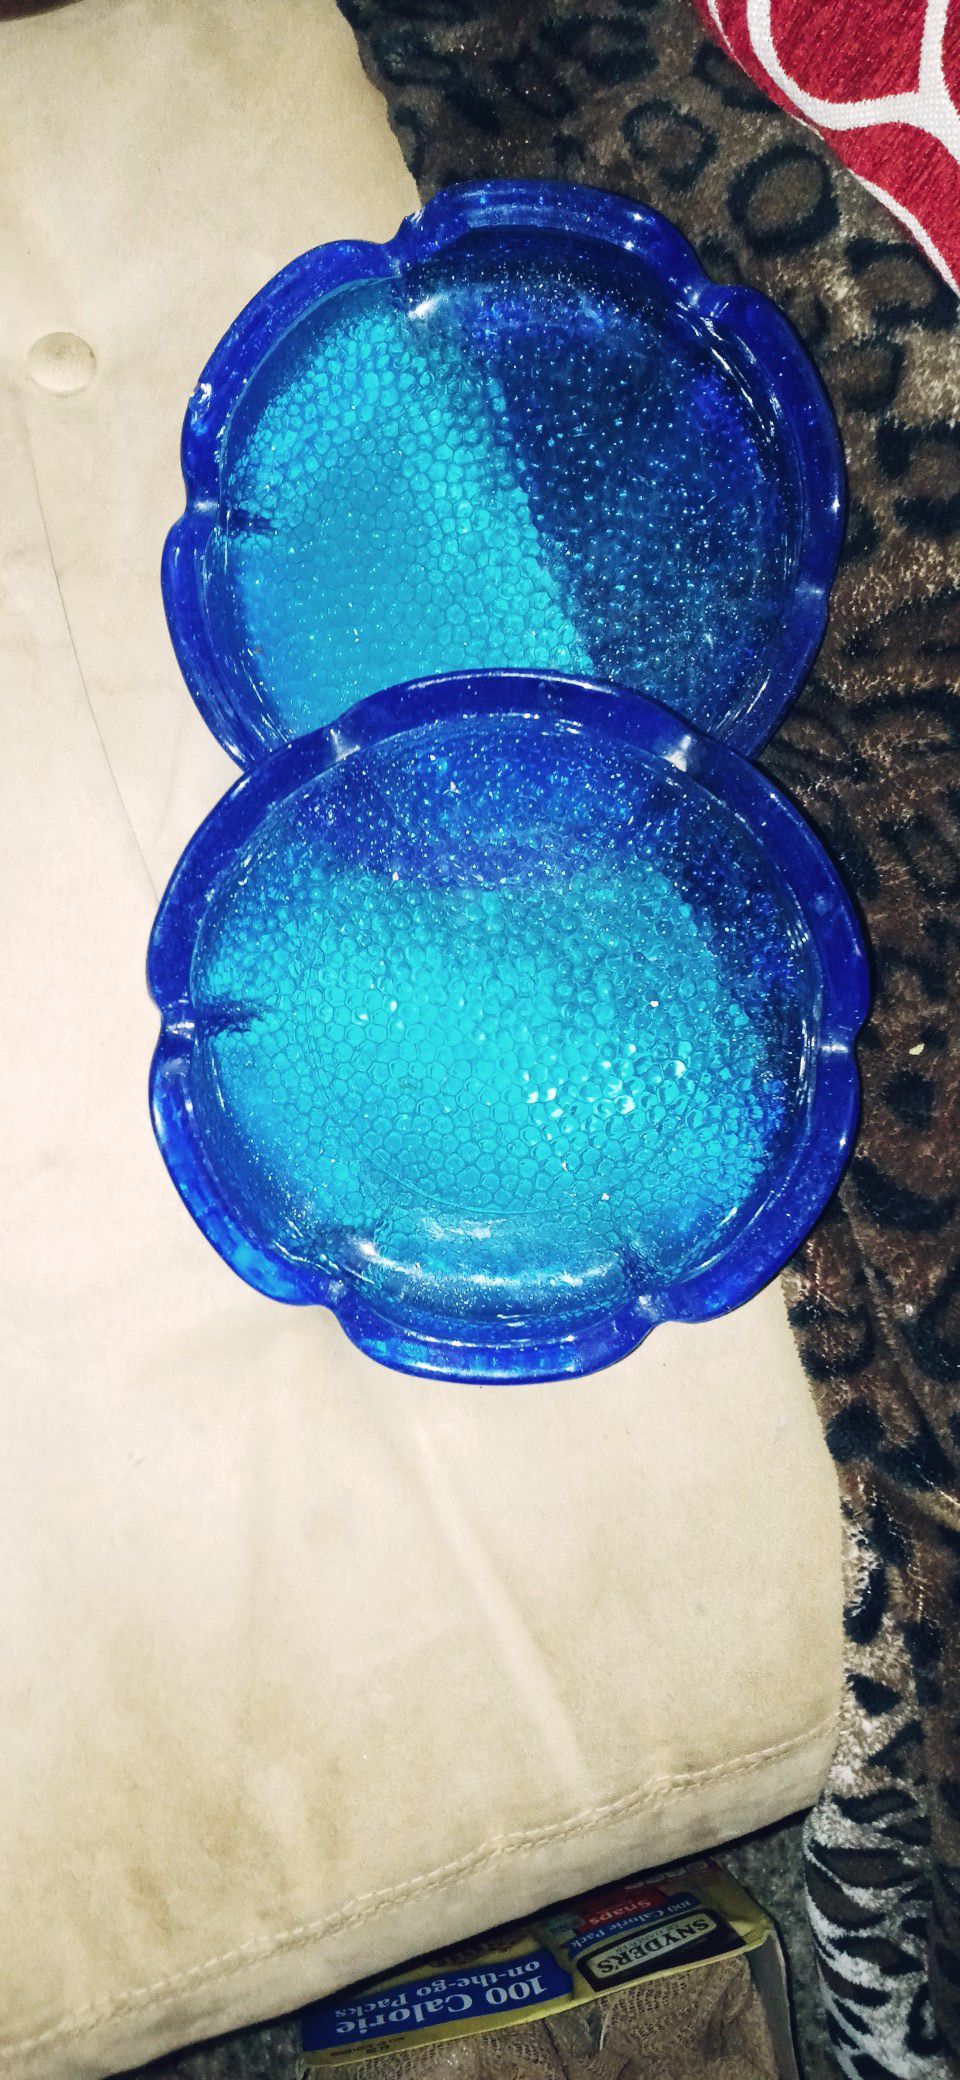 Vintage Hocking sapphire blue glass ashtrays and Princess House small plates three total